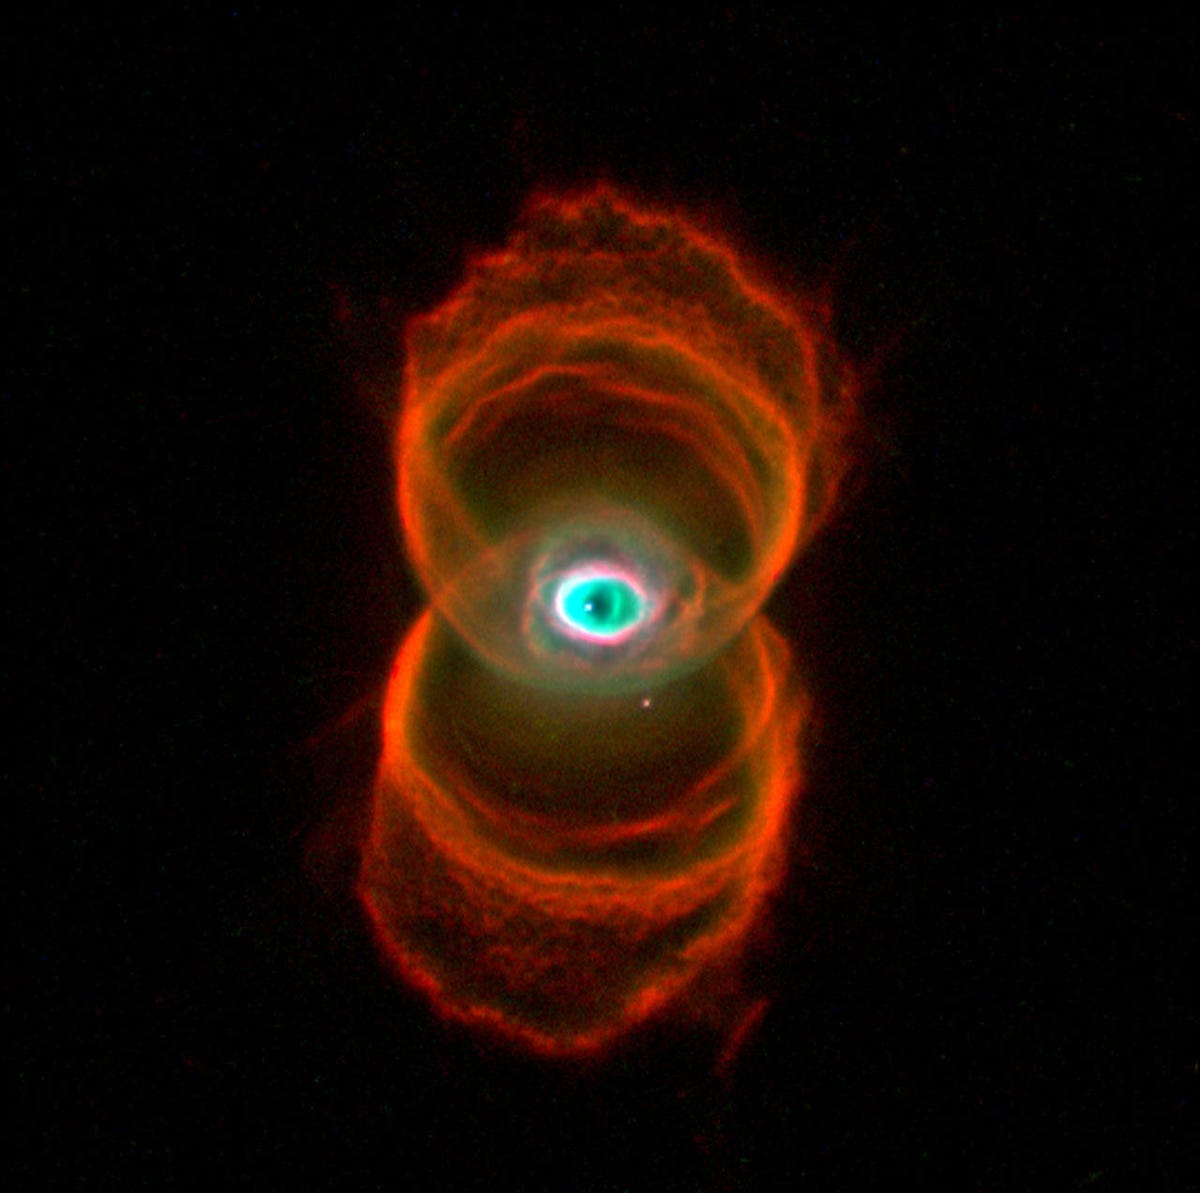 Spooky space image show creepy side of the cosmos